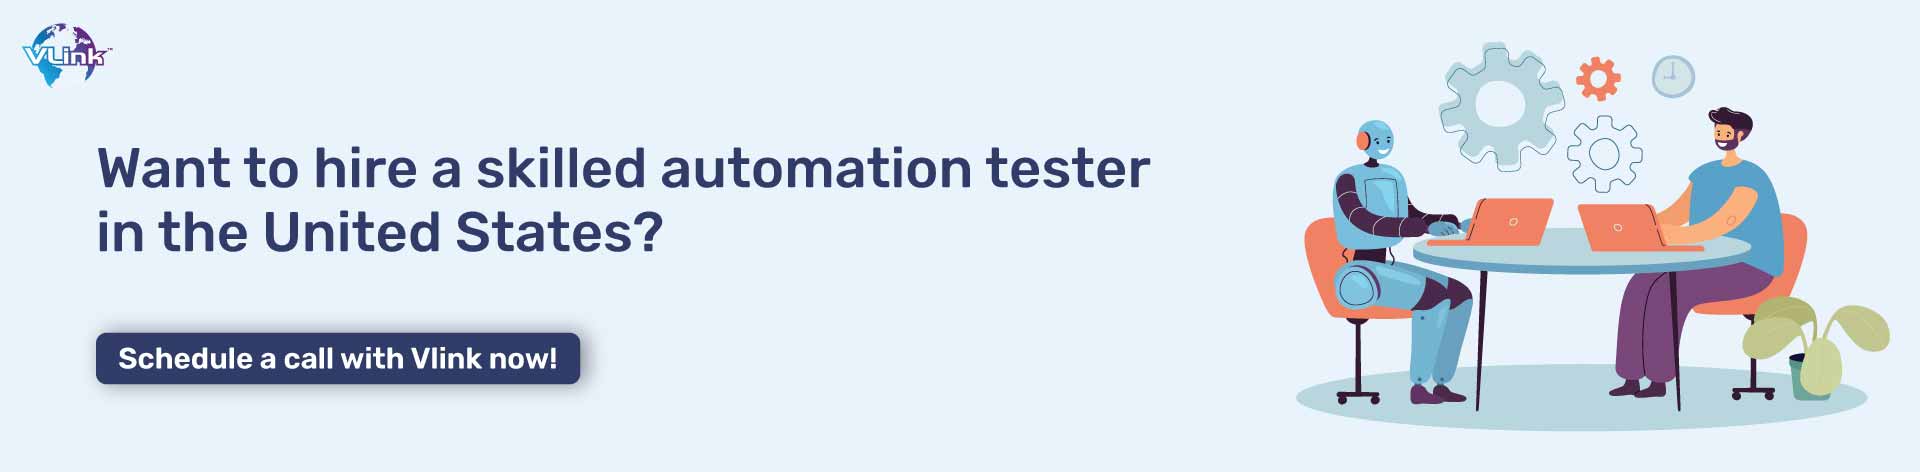 hire-automation-tester-in-us-cta